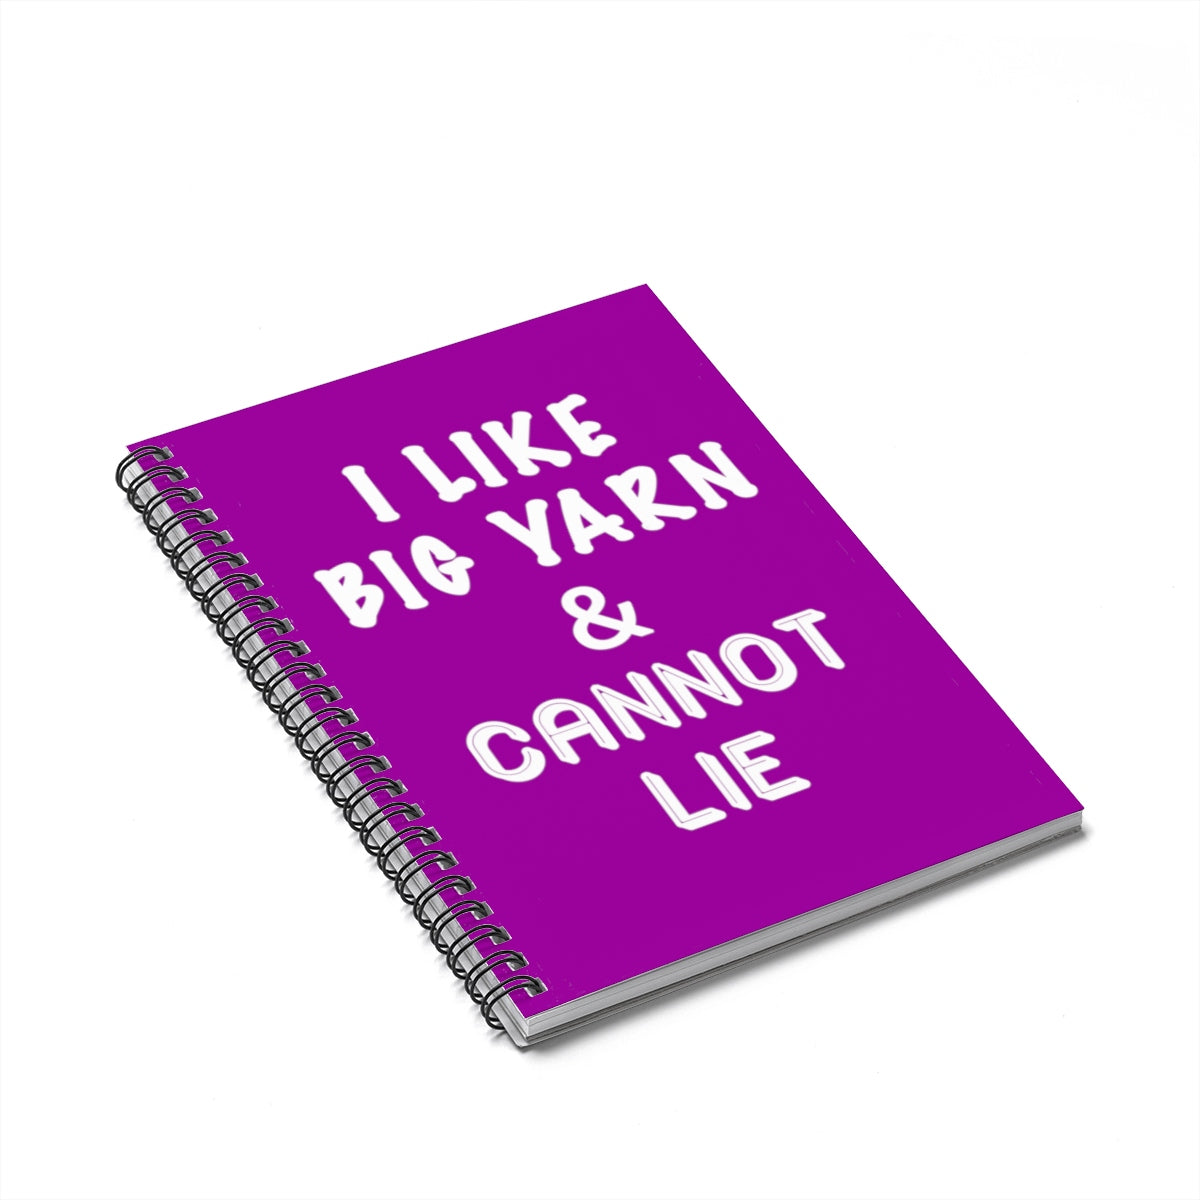 "I Like Big Yarn & Cannot Lie" White Letters - Spiral Notebook - Ruled Line